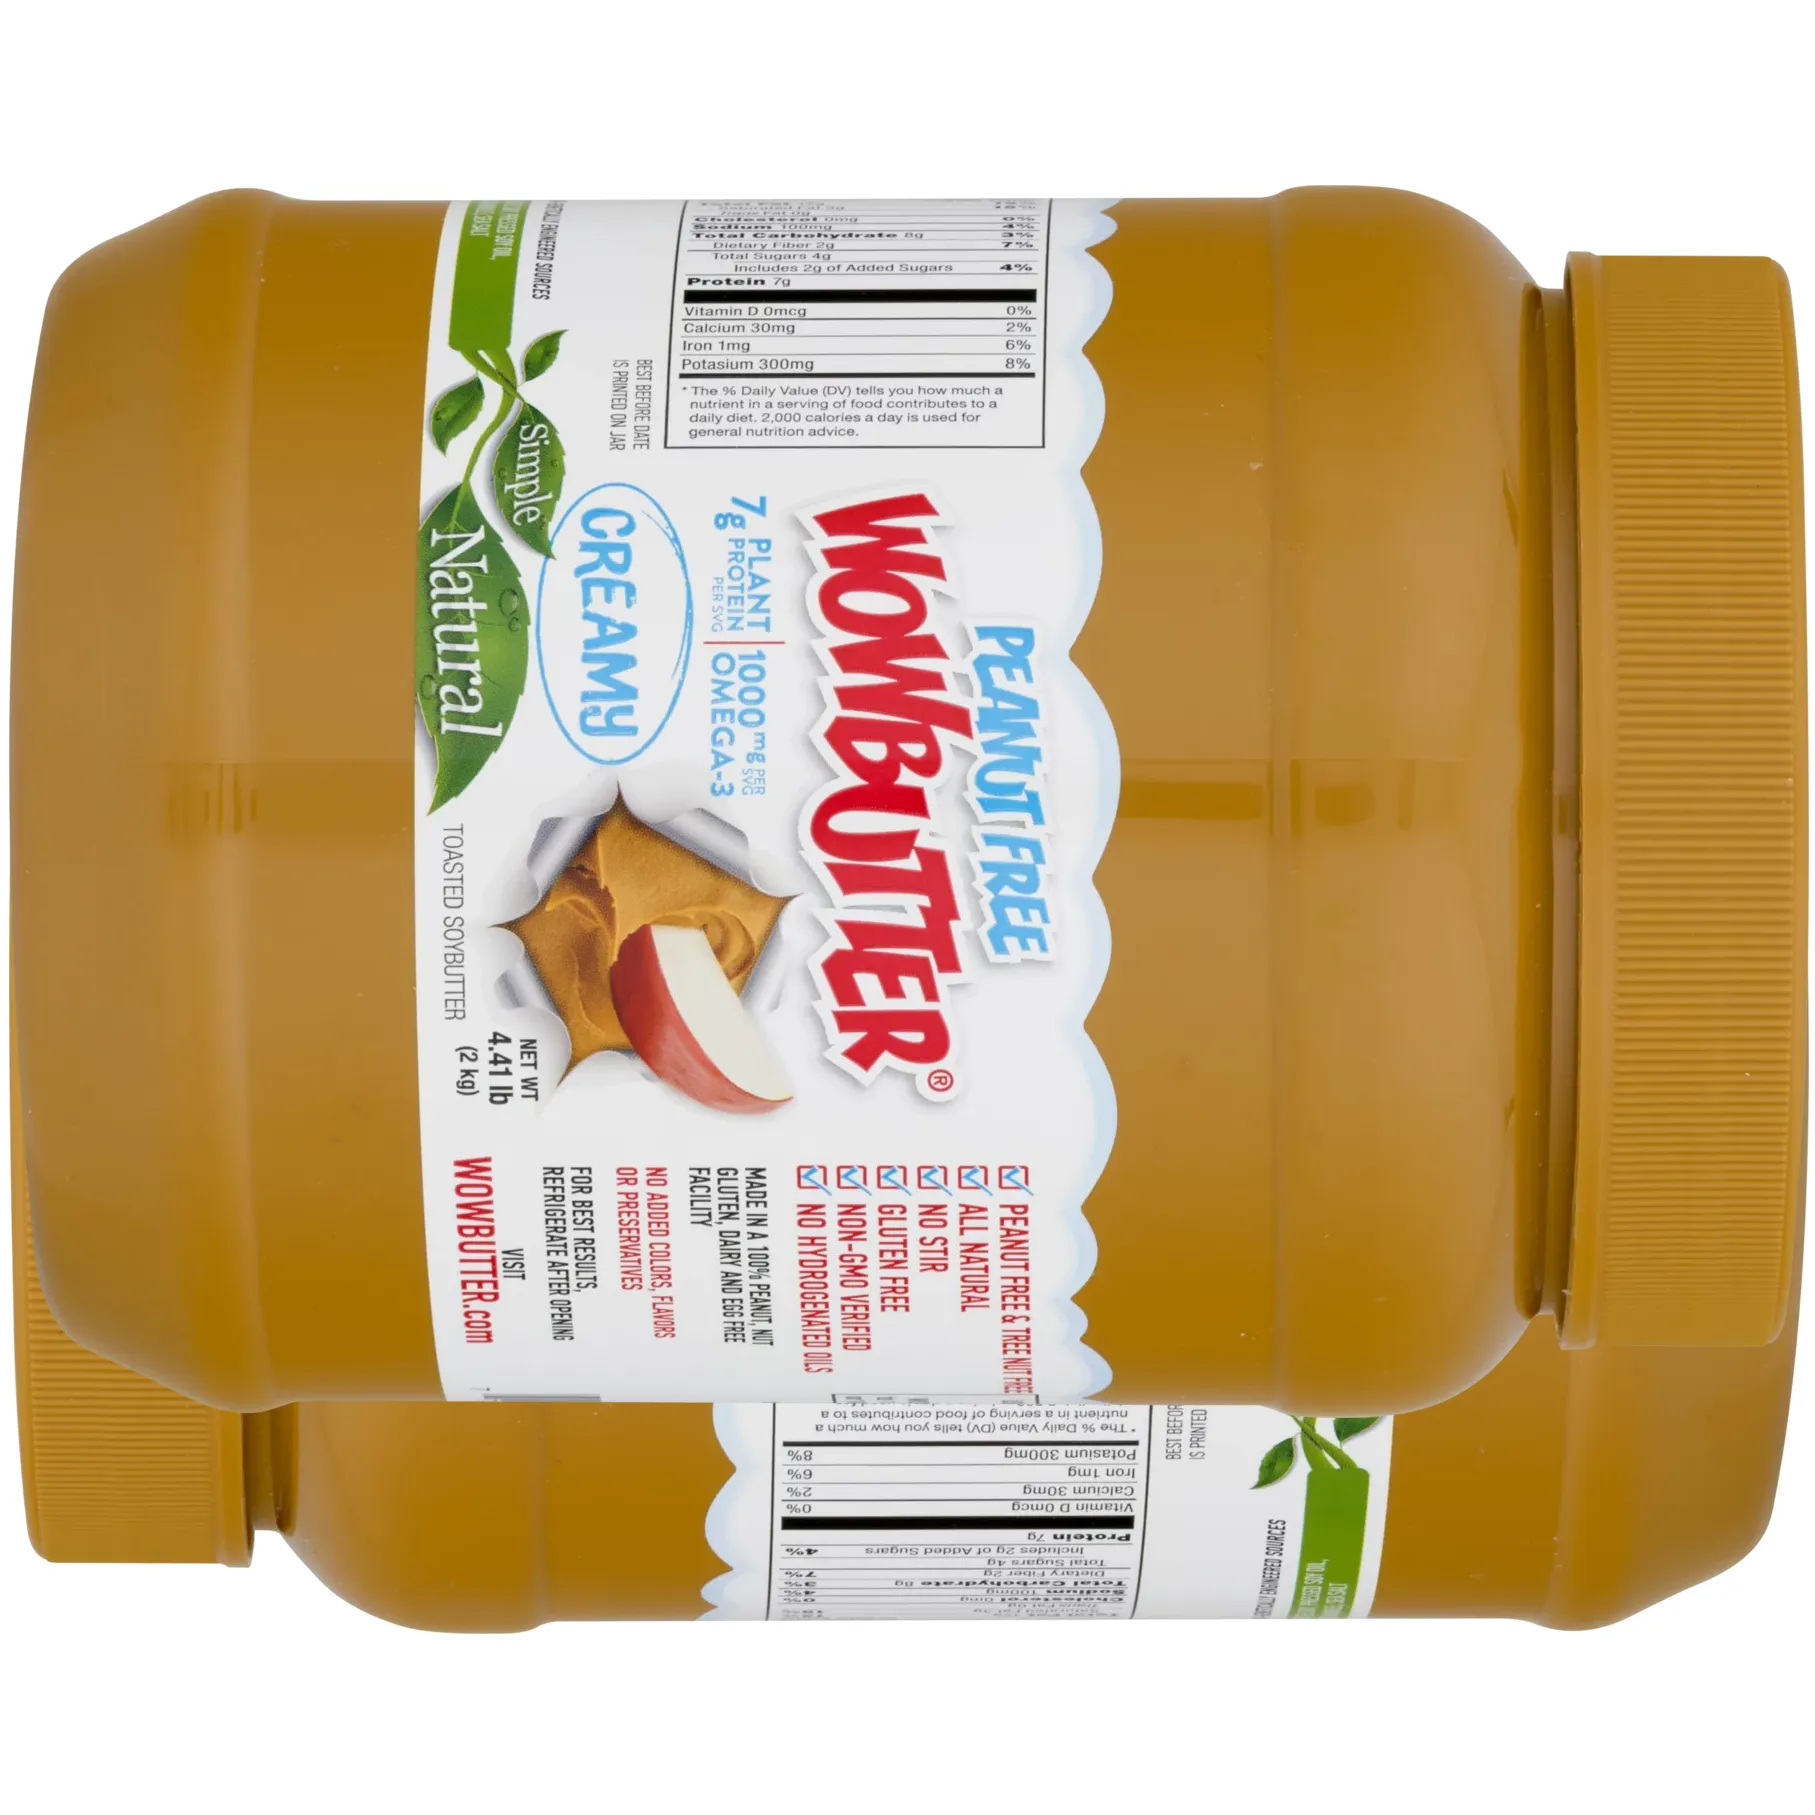 Free Wowbutter Creamy Peanut Free Toasted Soy Spread